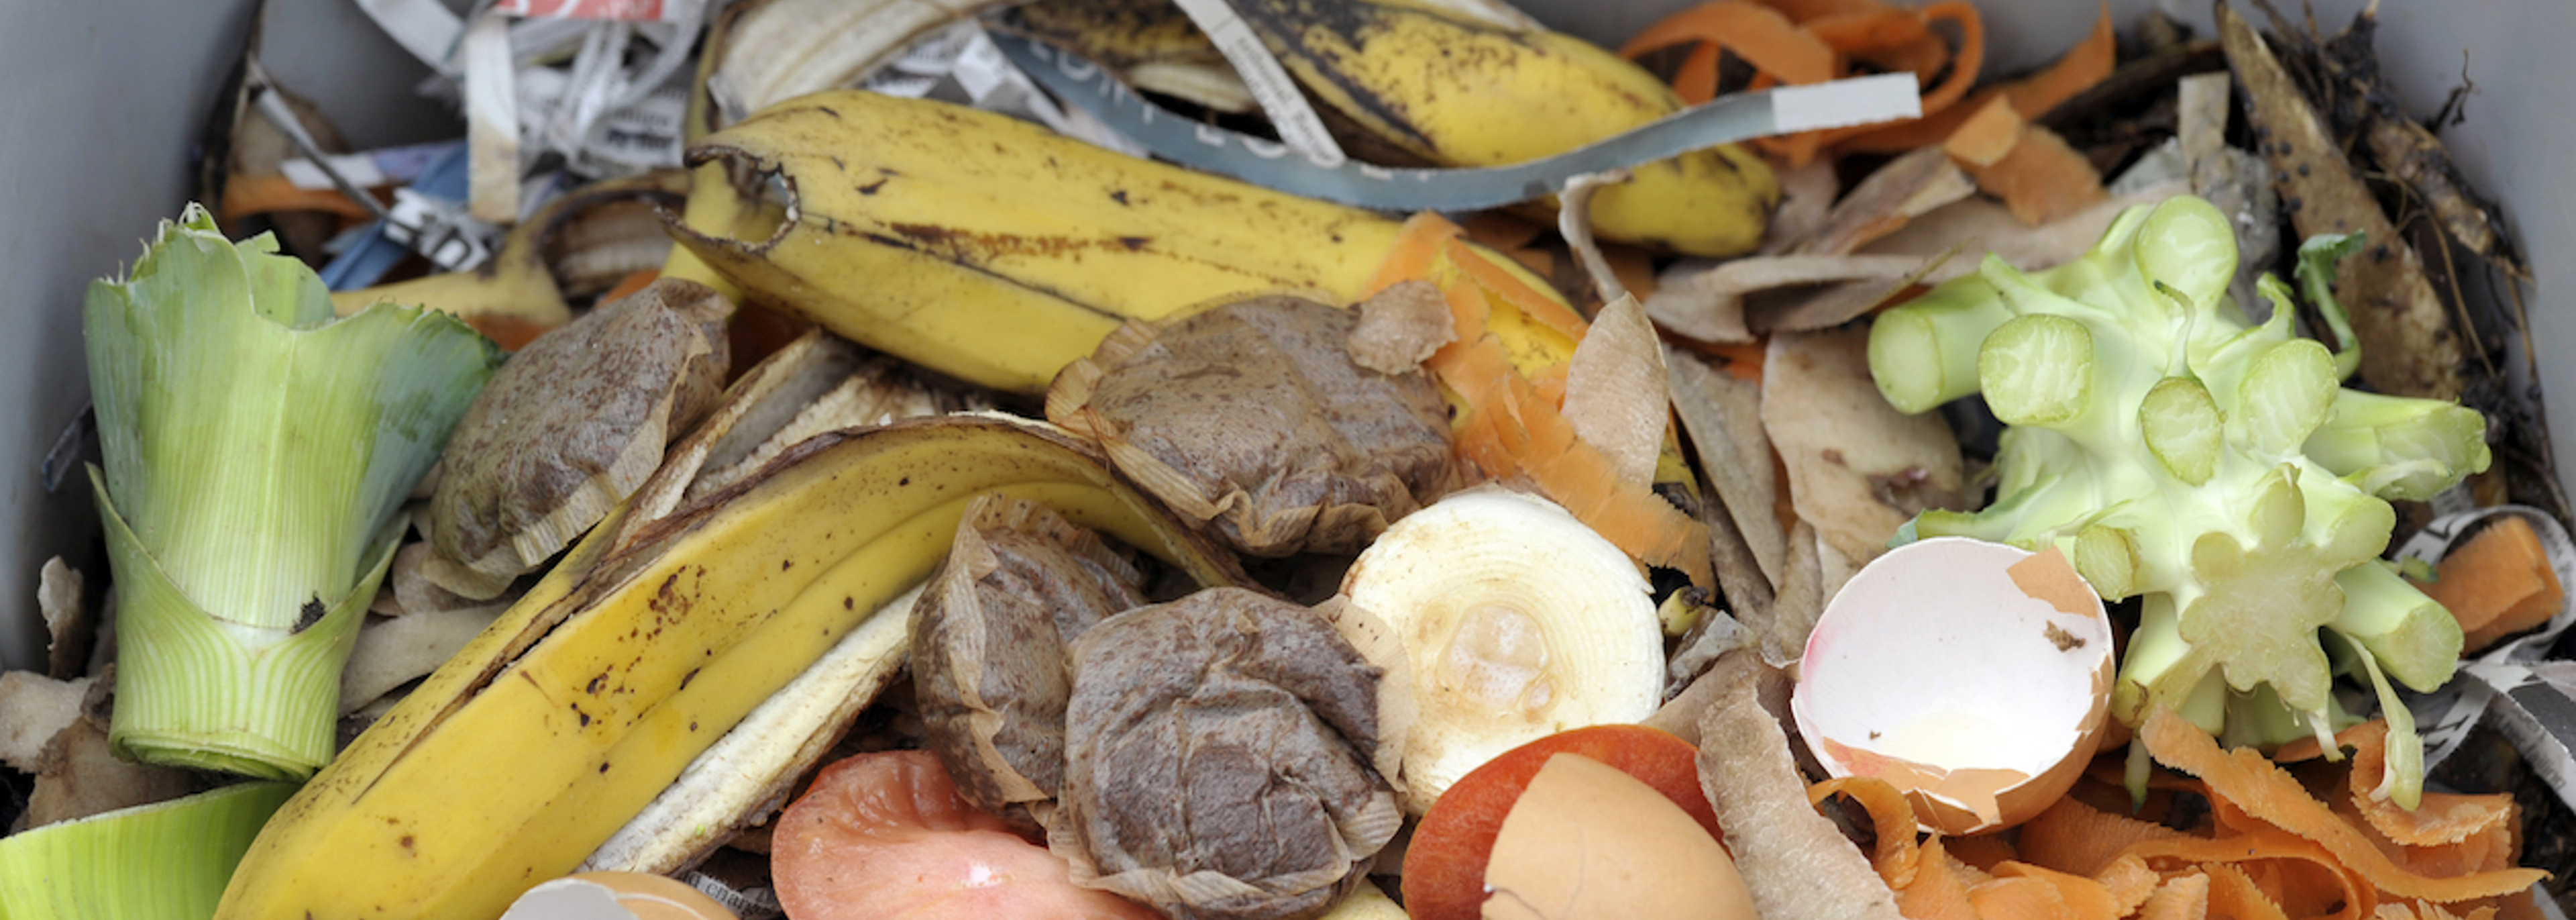 Food waste reduces as households adapt to eating in